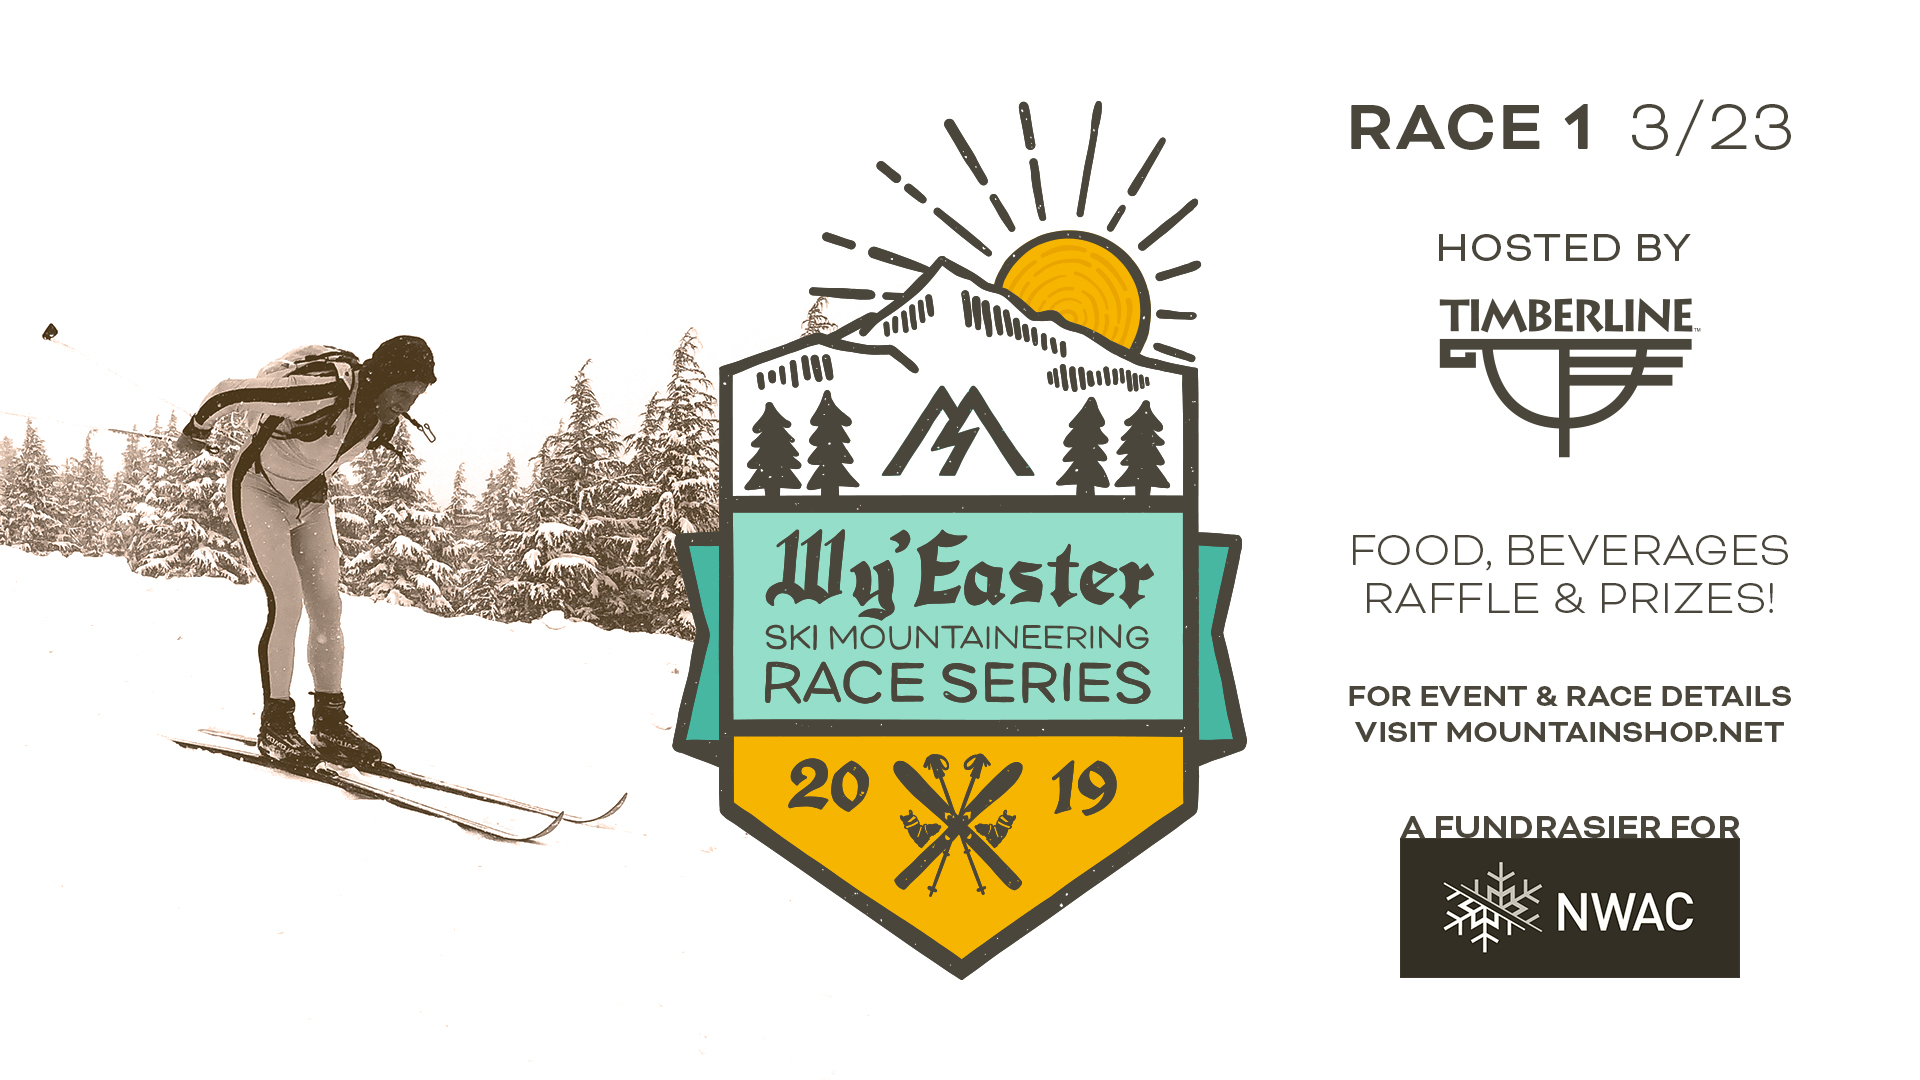 Wy'Easter Ski Mountaineering Race at Timberline